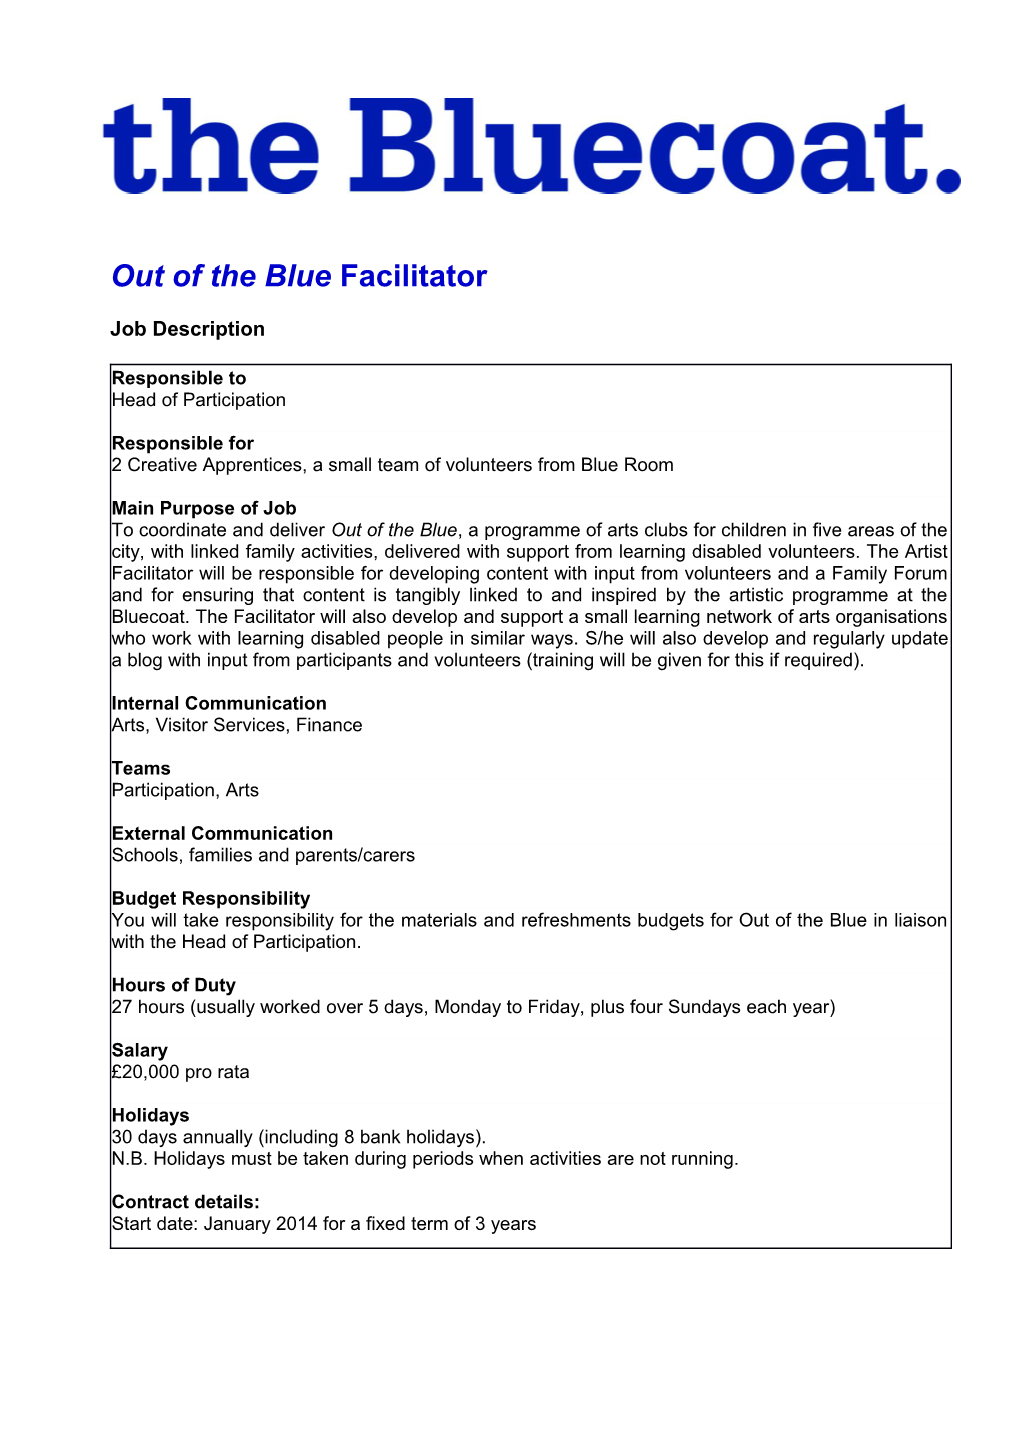 Out of the Blue Facilitator